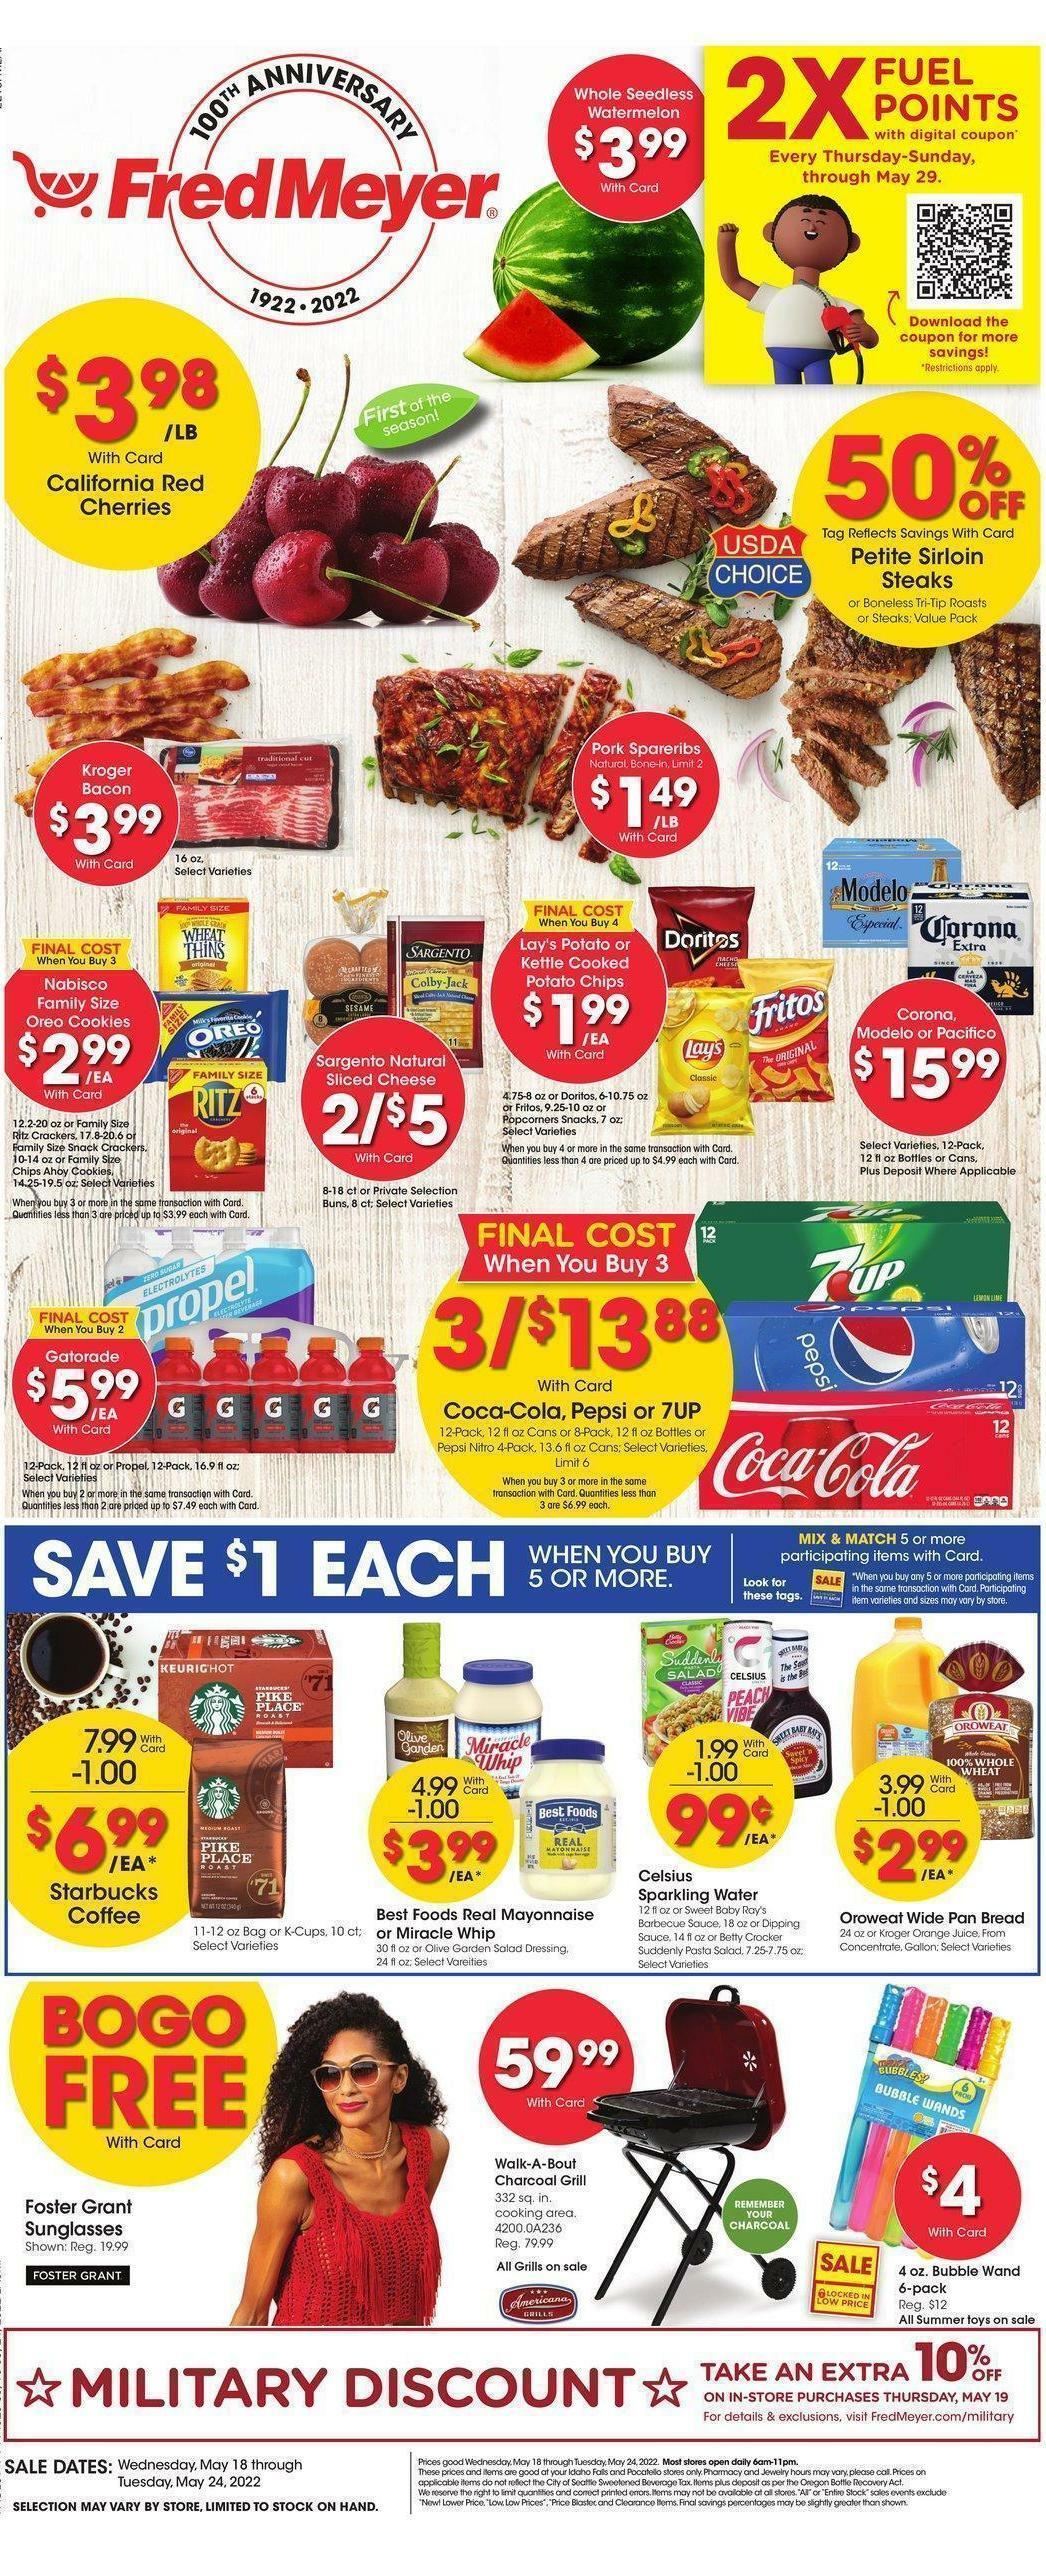 Fred Meyer Weekly Ad from May 18